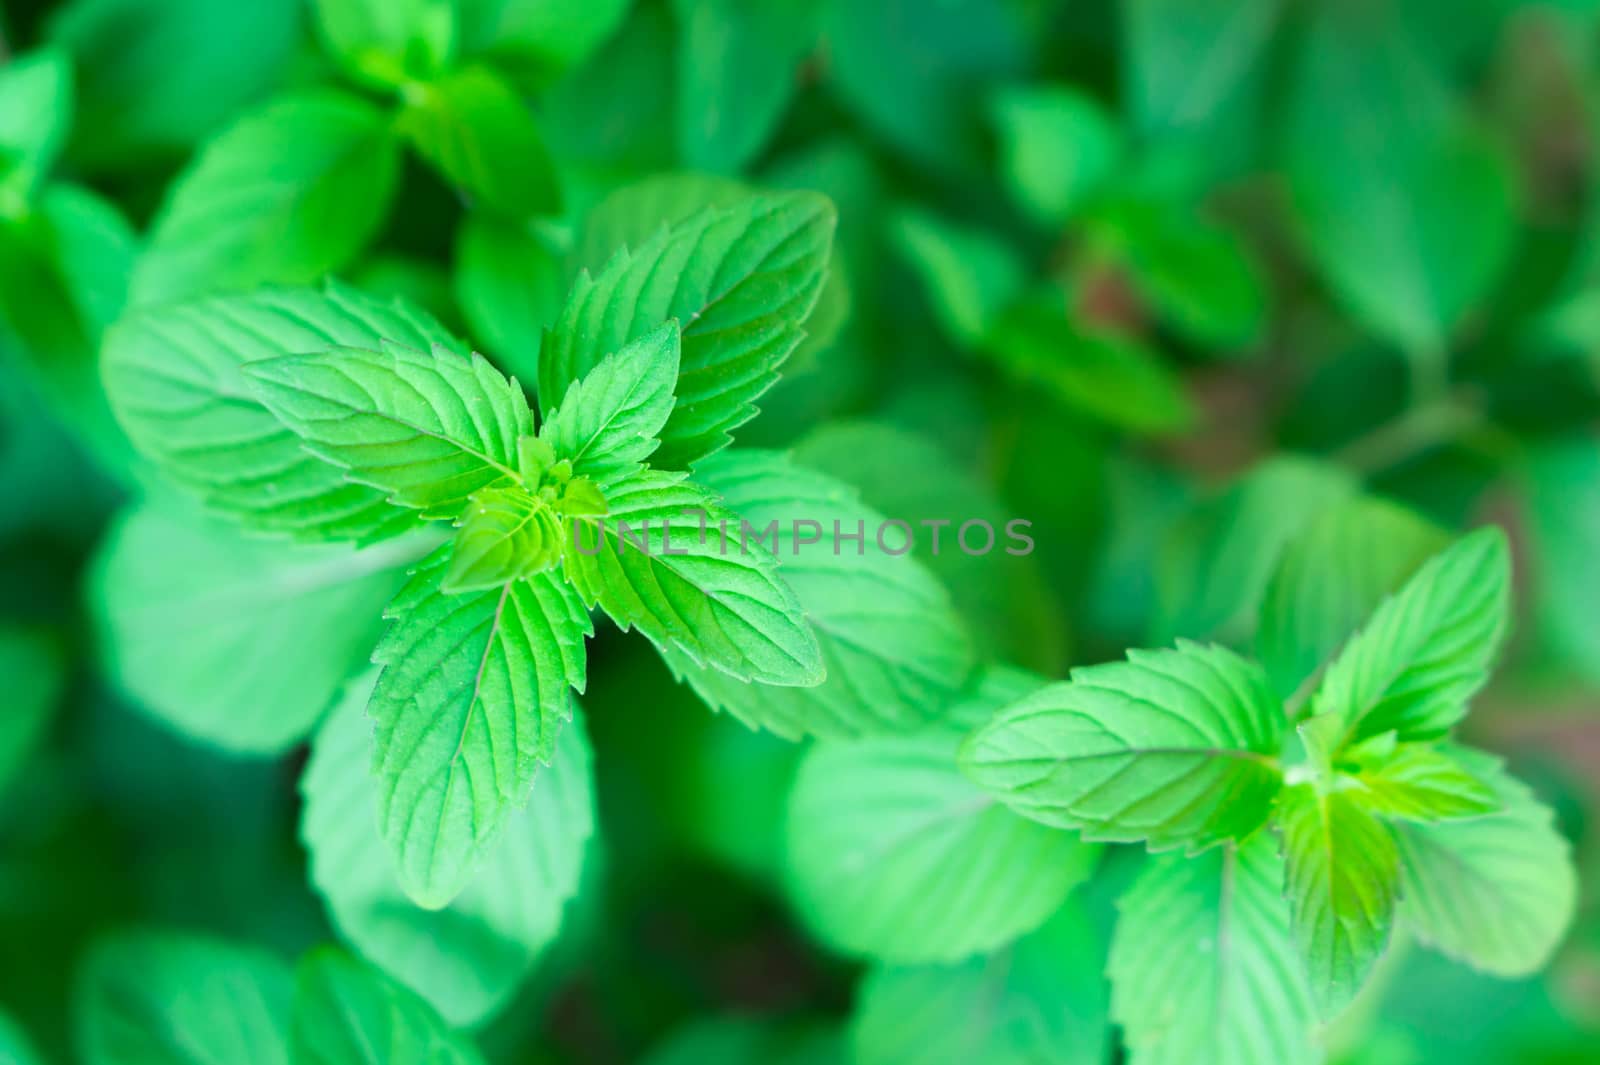 Closeup fresh pepper mint in pot, herb and health care concept, selective focus